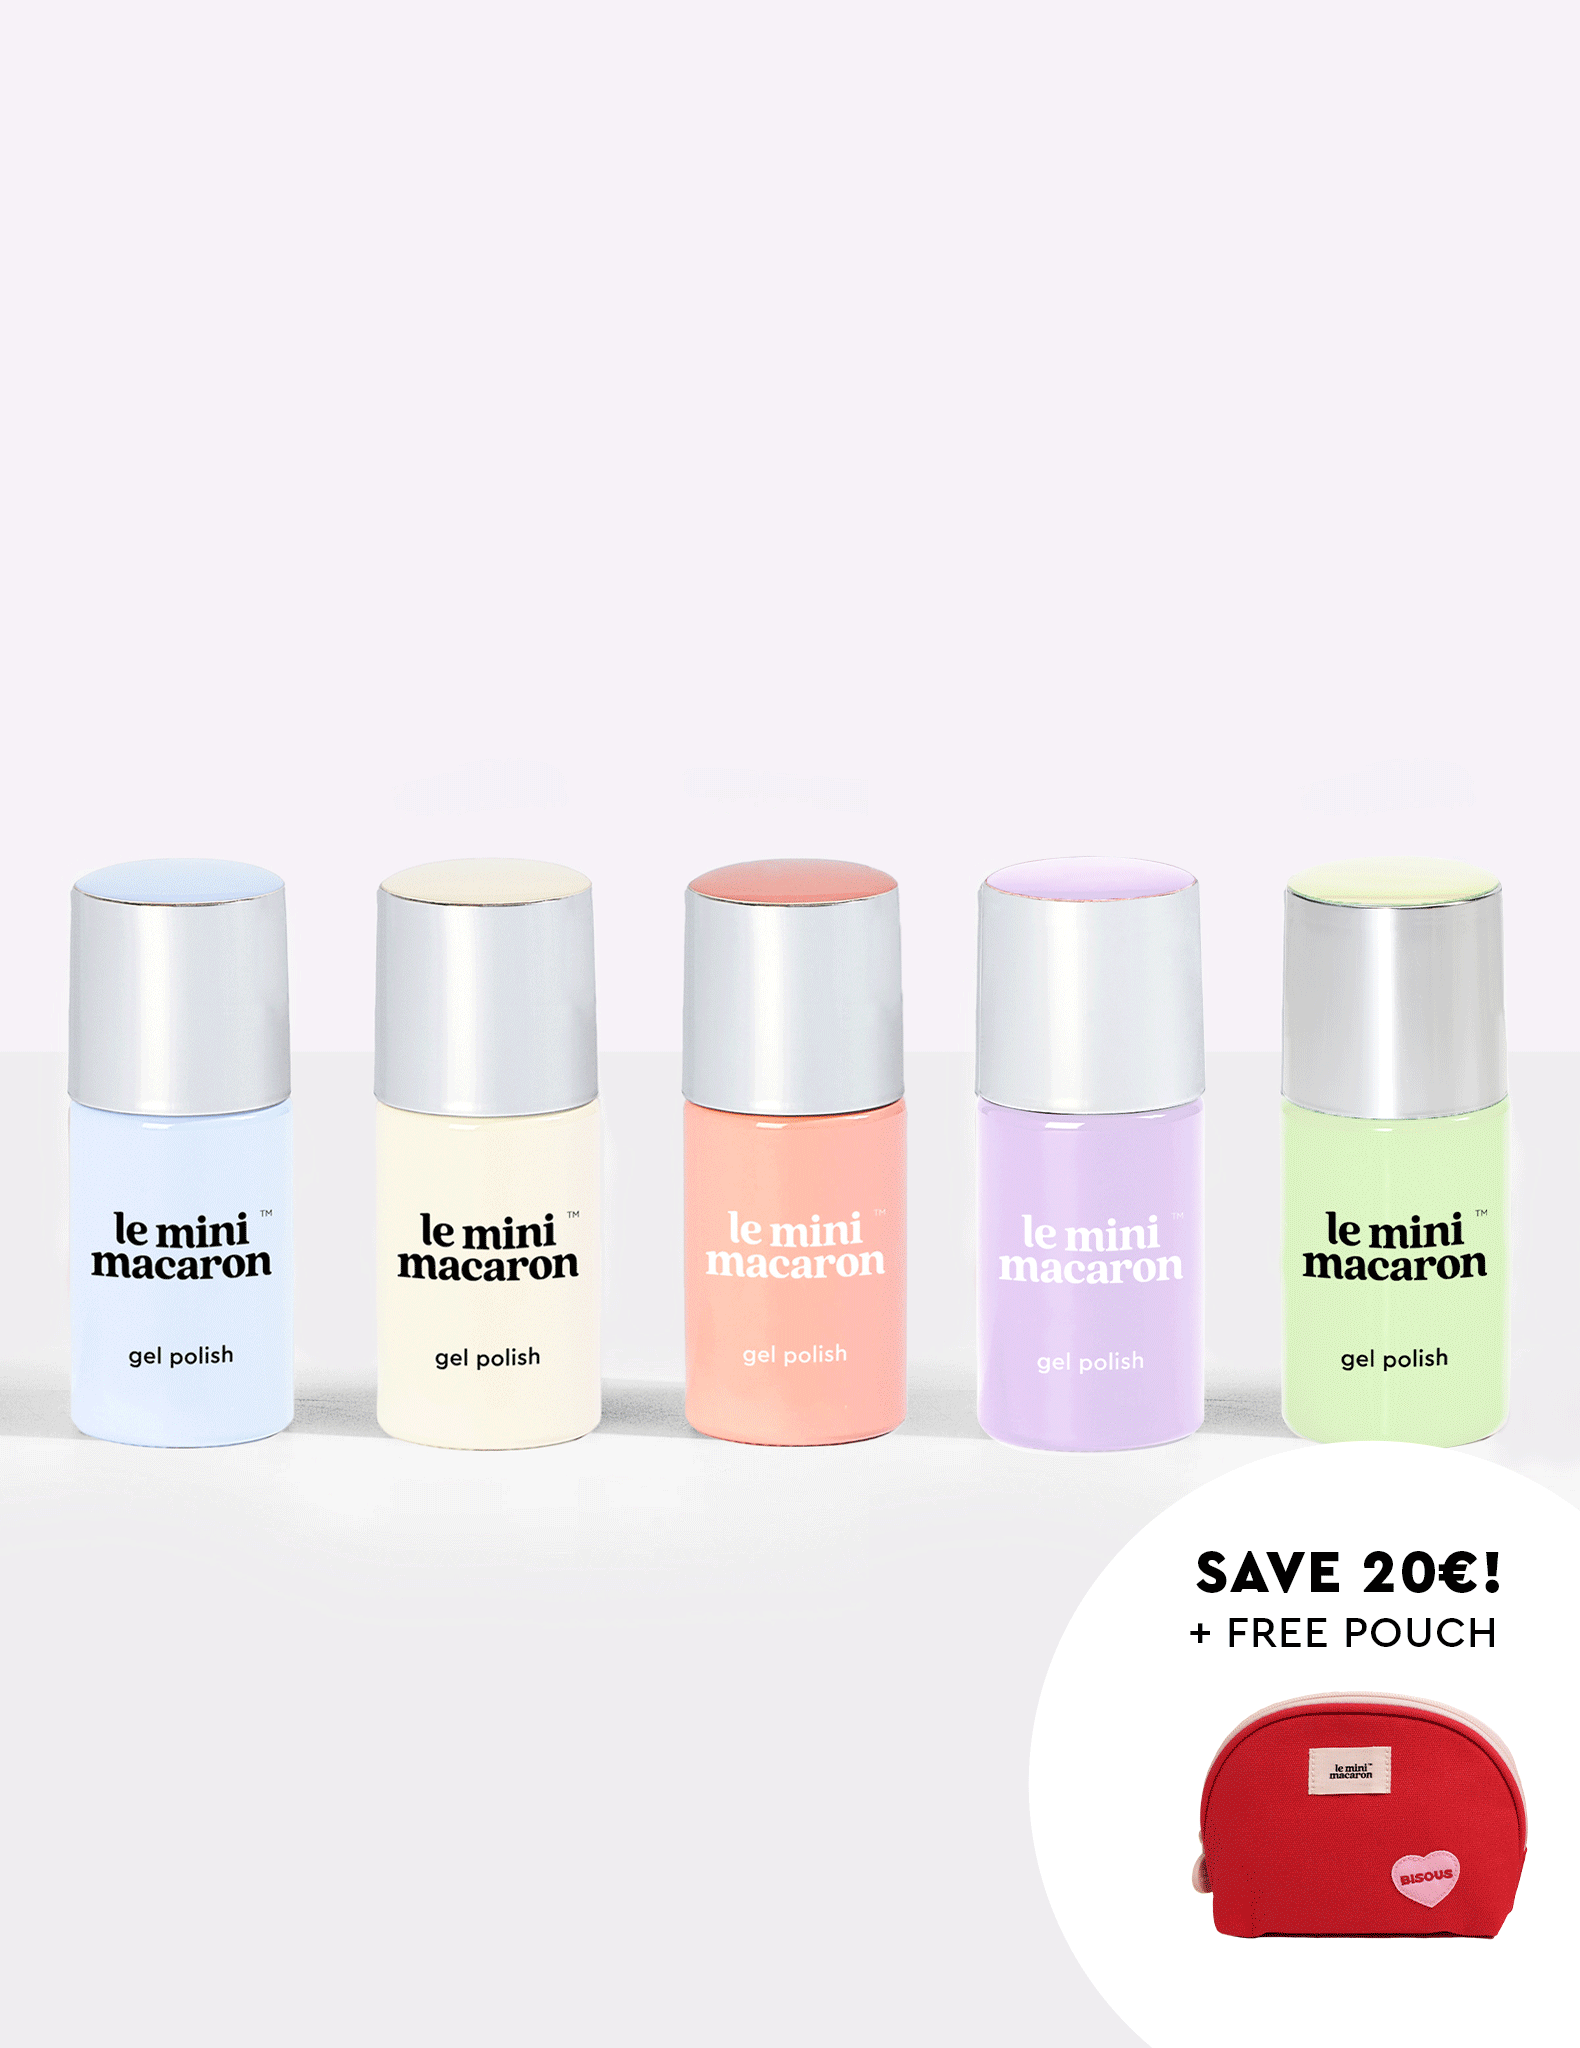 SAVE 20€ When Buying 5 Shades + FREE Cotton Pouch - Le Mini Macaron